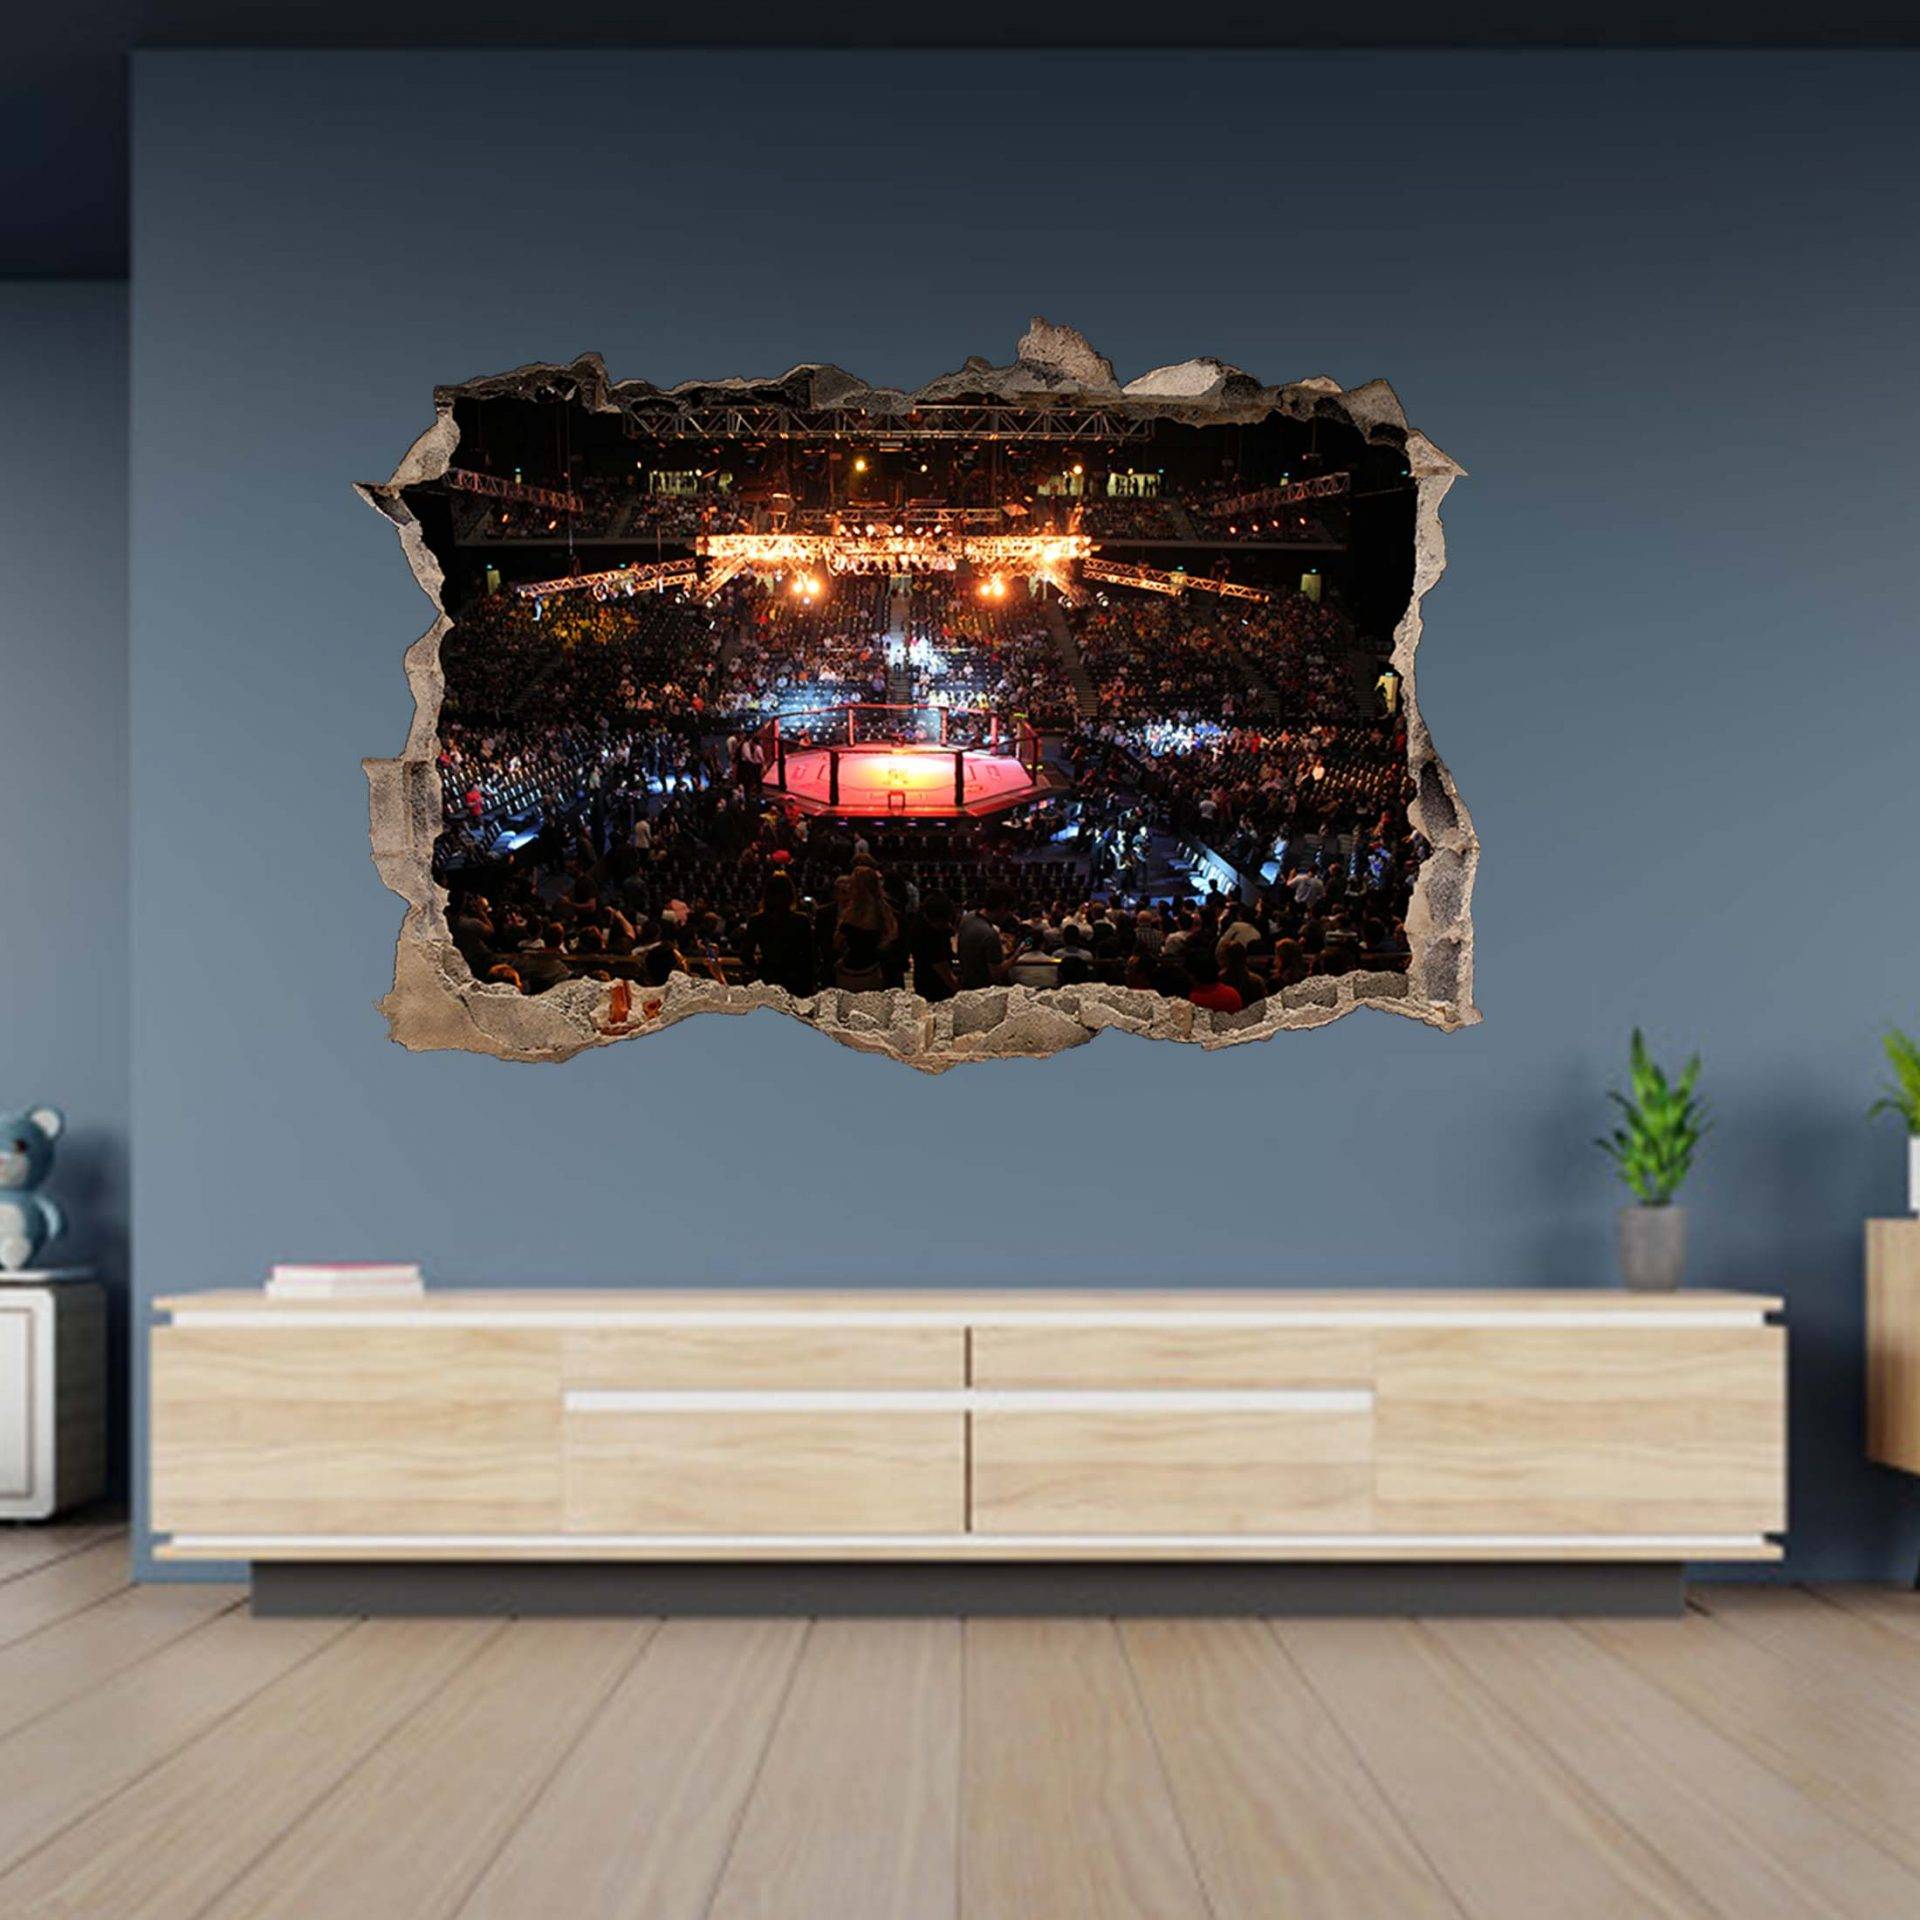 MMA Fight Arena Theme 3D Hole in The Wall Effect Decal Art Sticker Mural